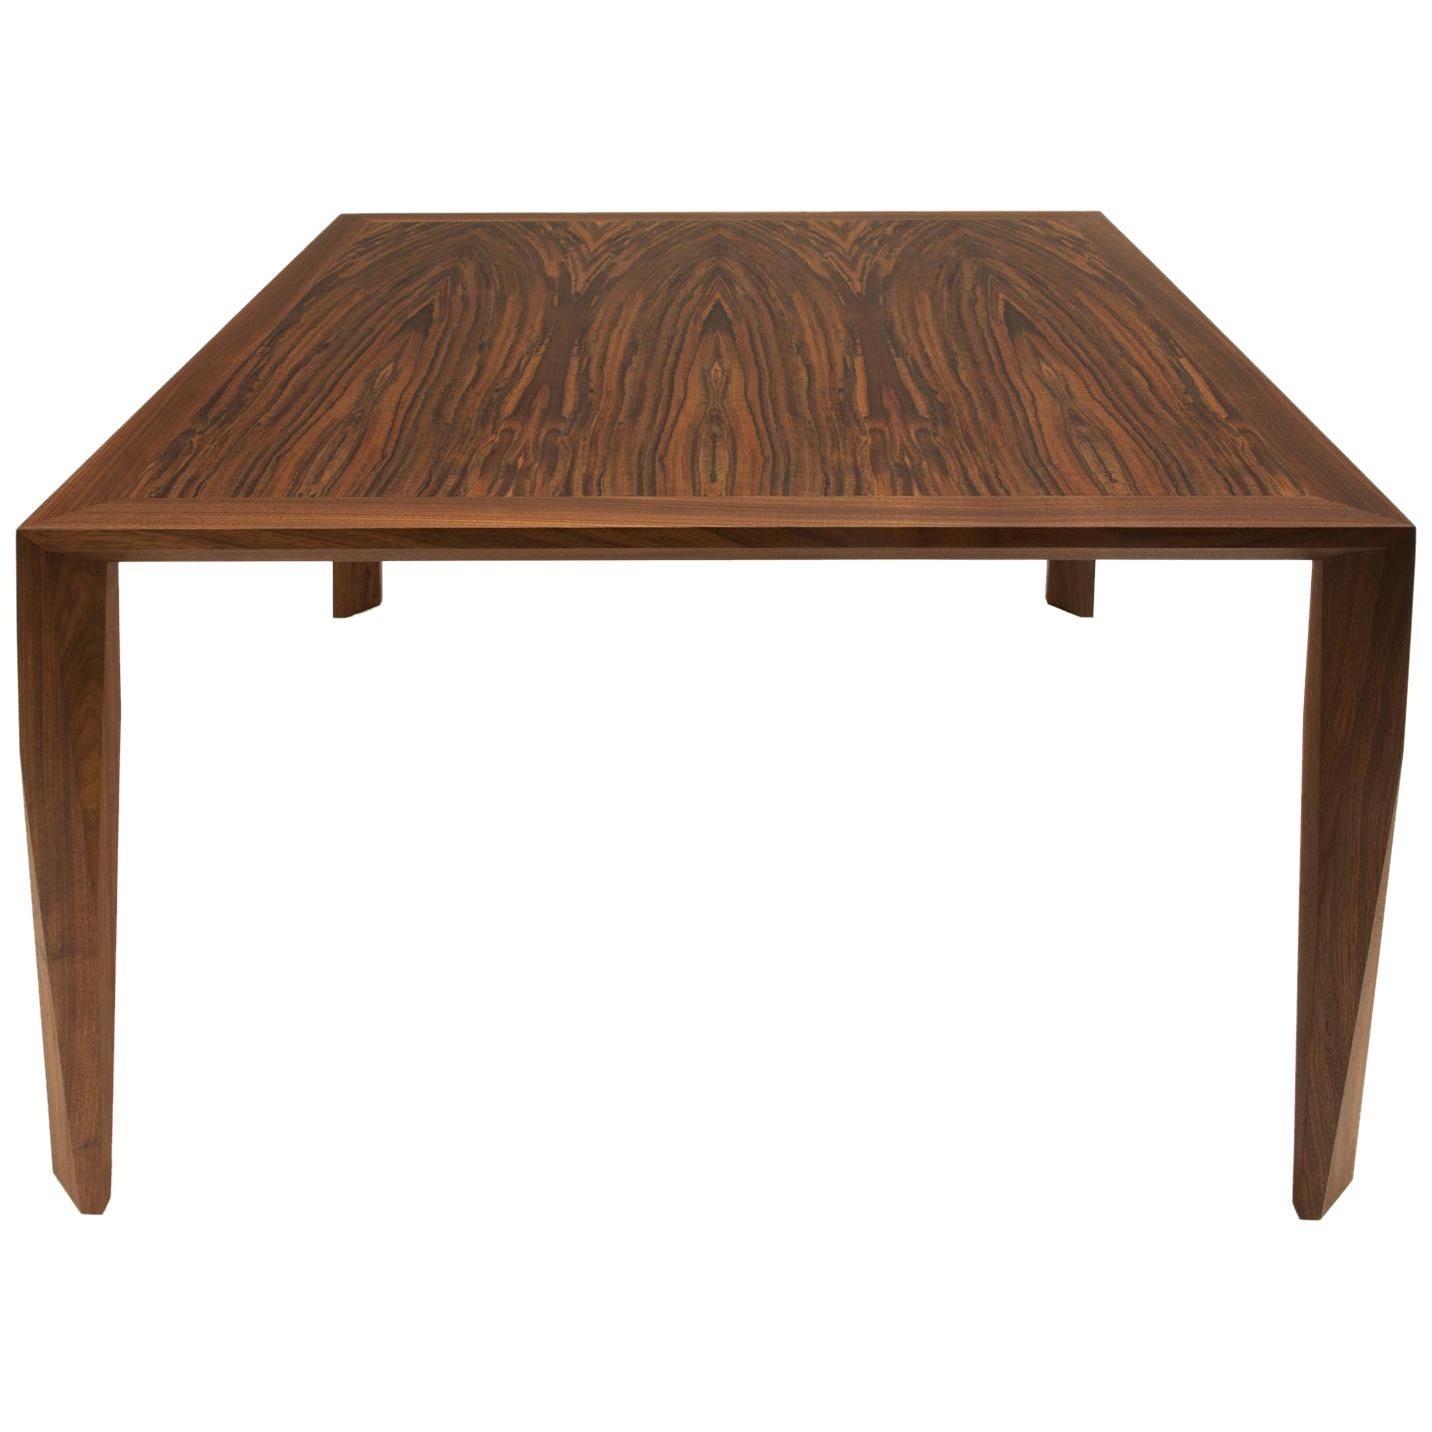 Modern Wood Dining Table, in Walnut, by Studio DiPaolo